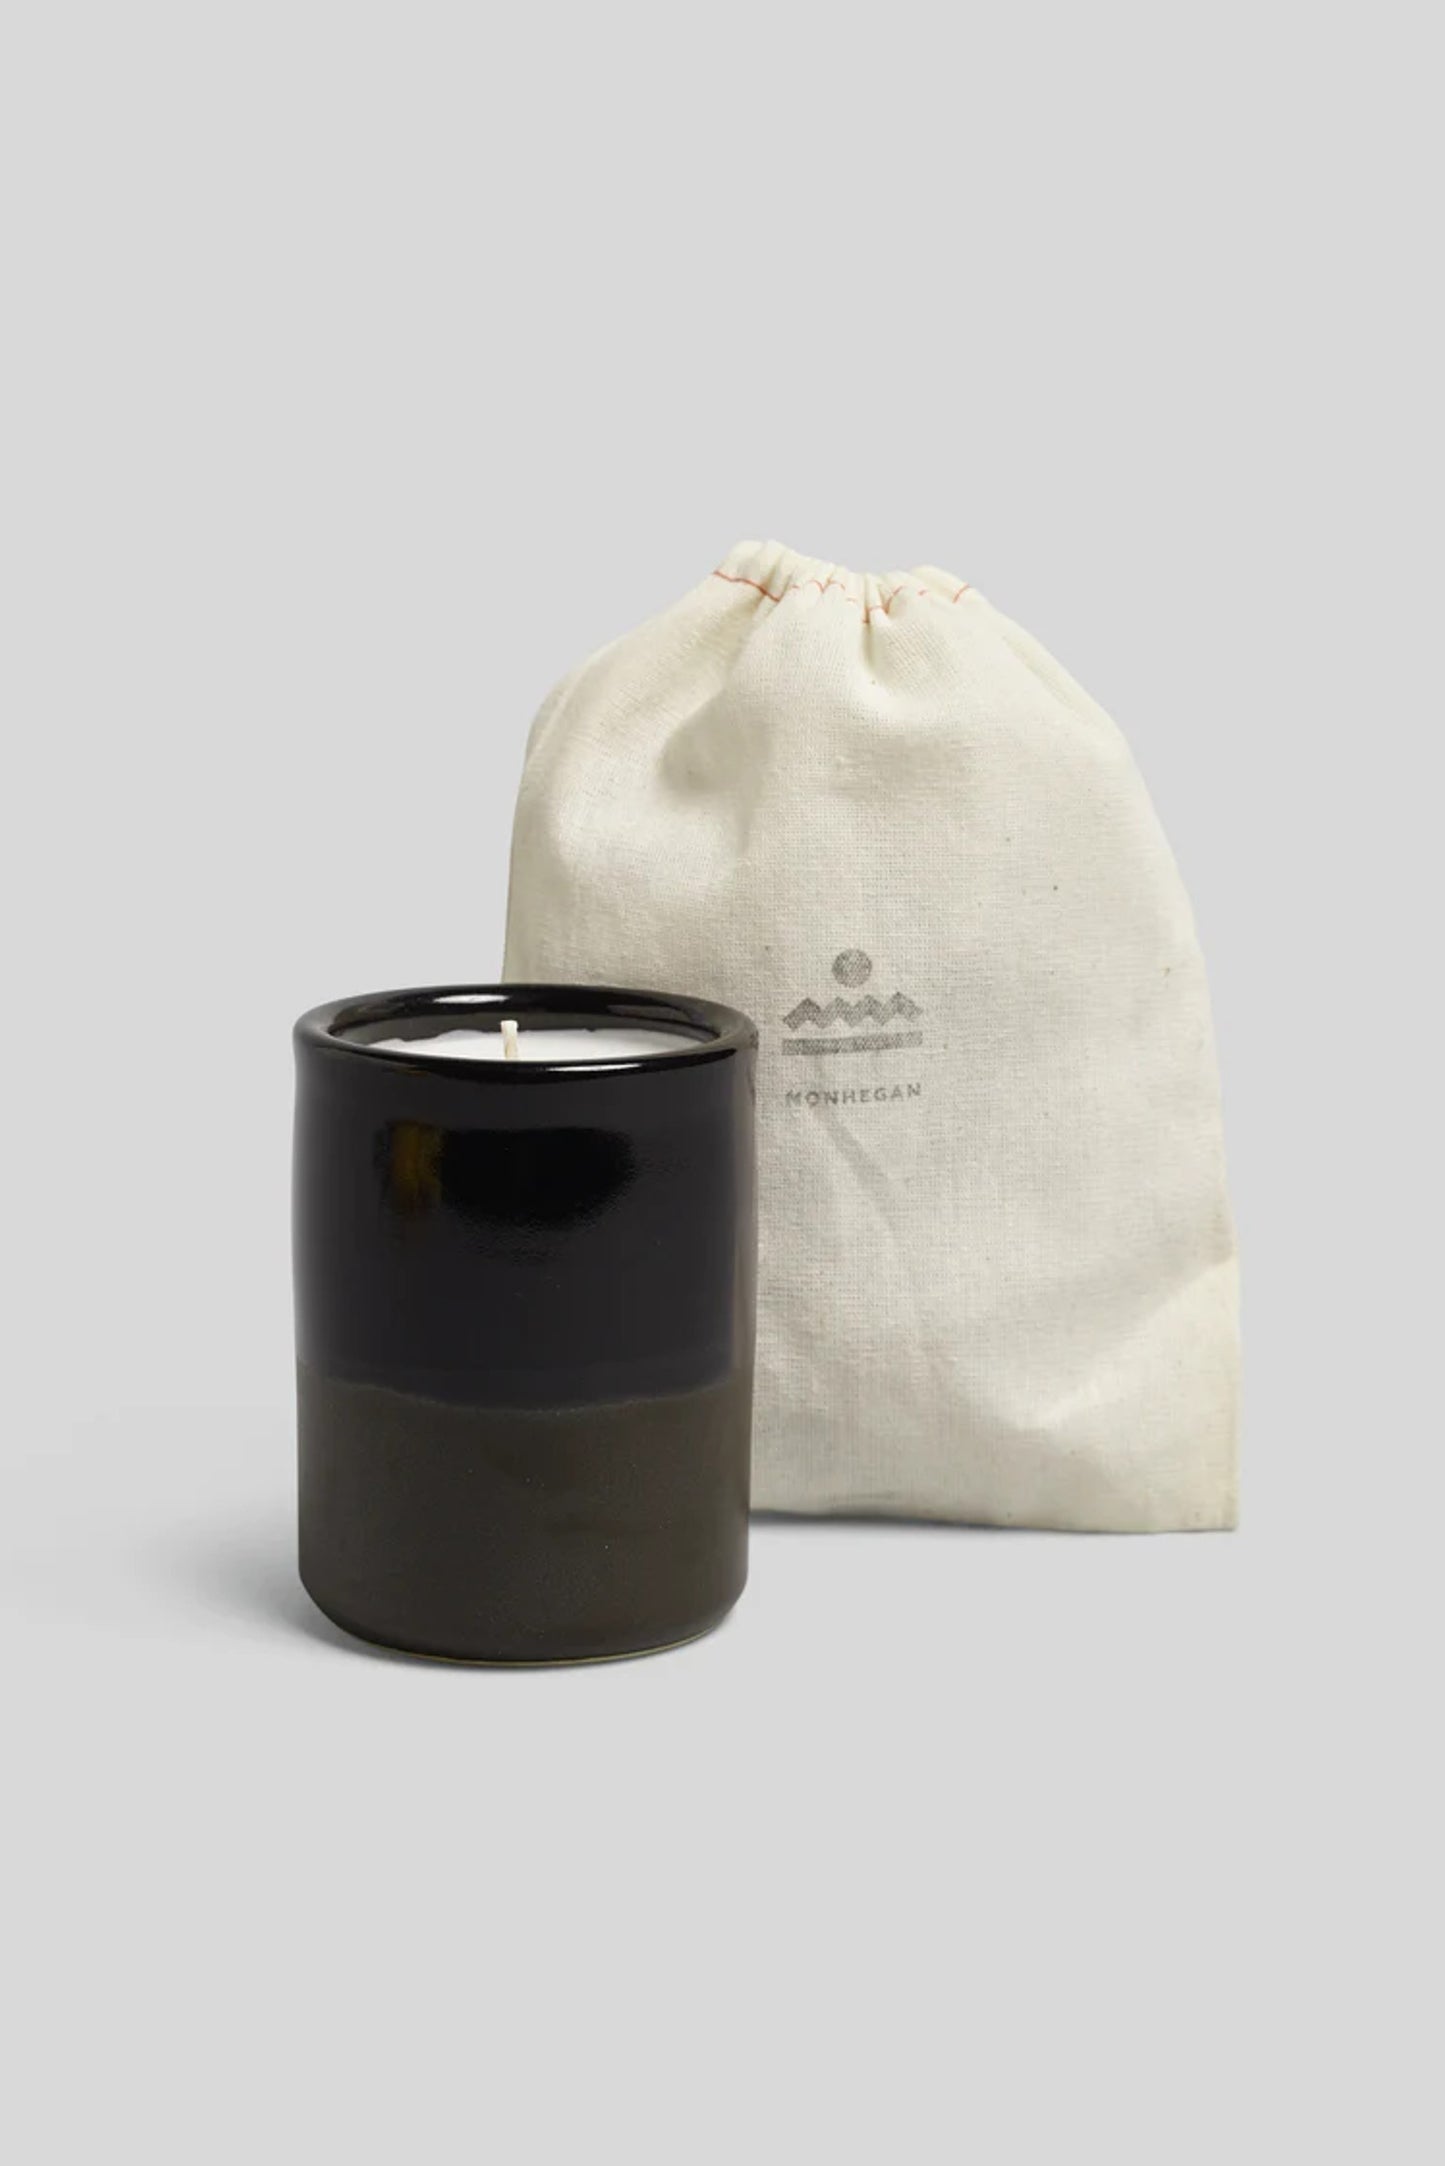 NORDEN GOODS Made in California Handthrown Ceramic Coconut and Apricot Wax Sustainable Organic Candle Tobacco and Sandalwood Monhegan Scent